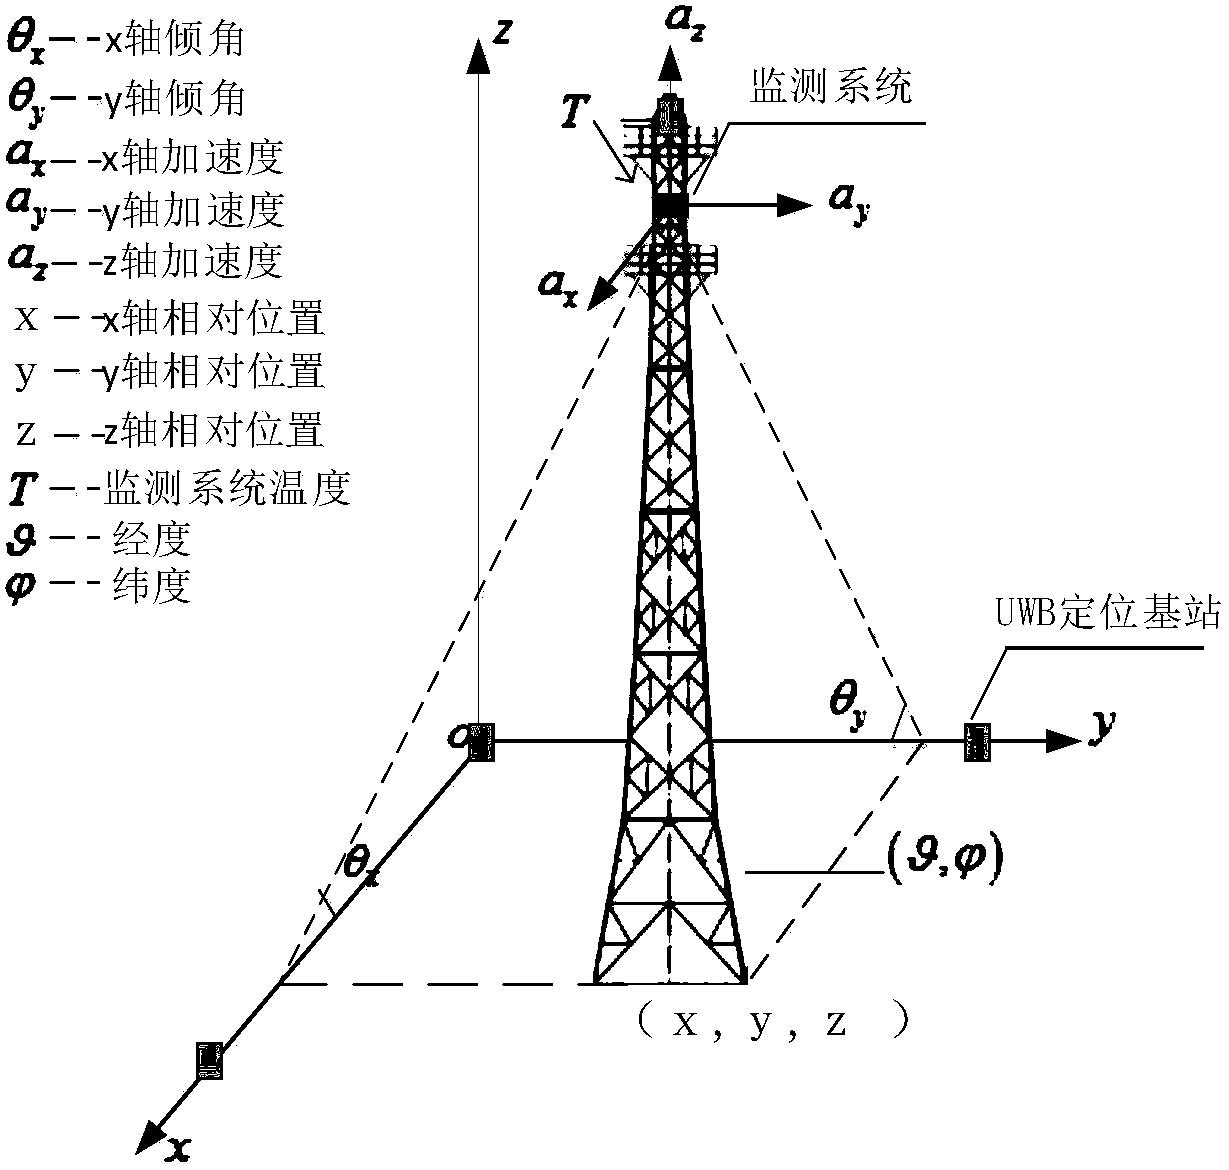 Online-monitoring system for iron tower based on multi-source information